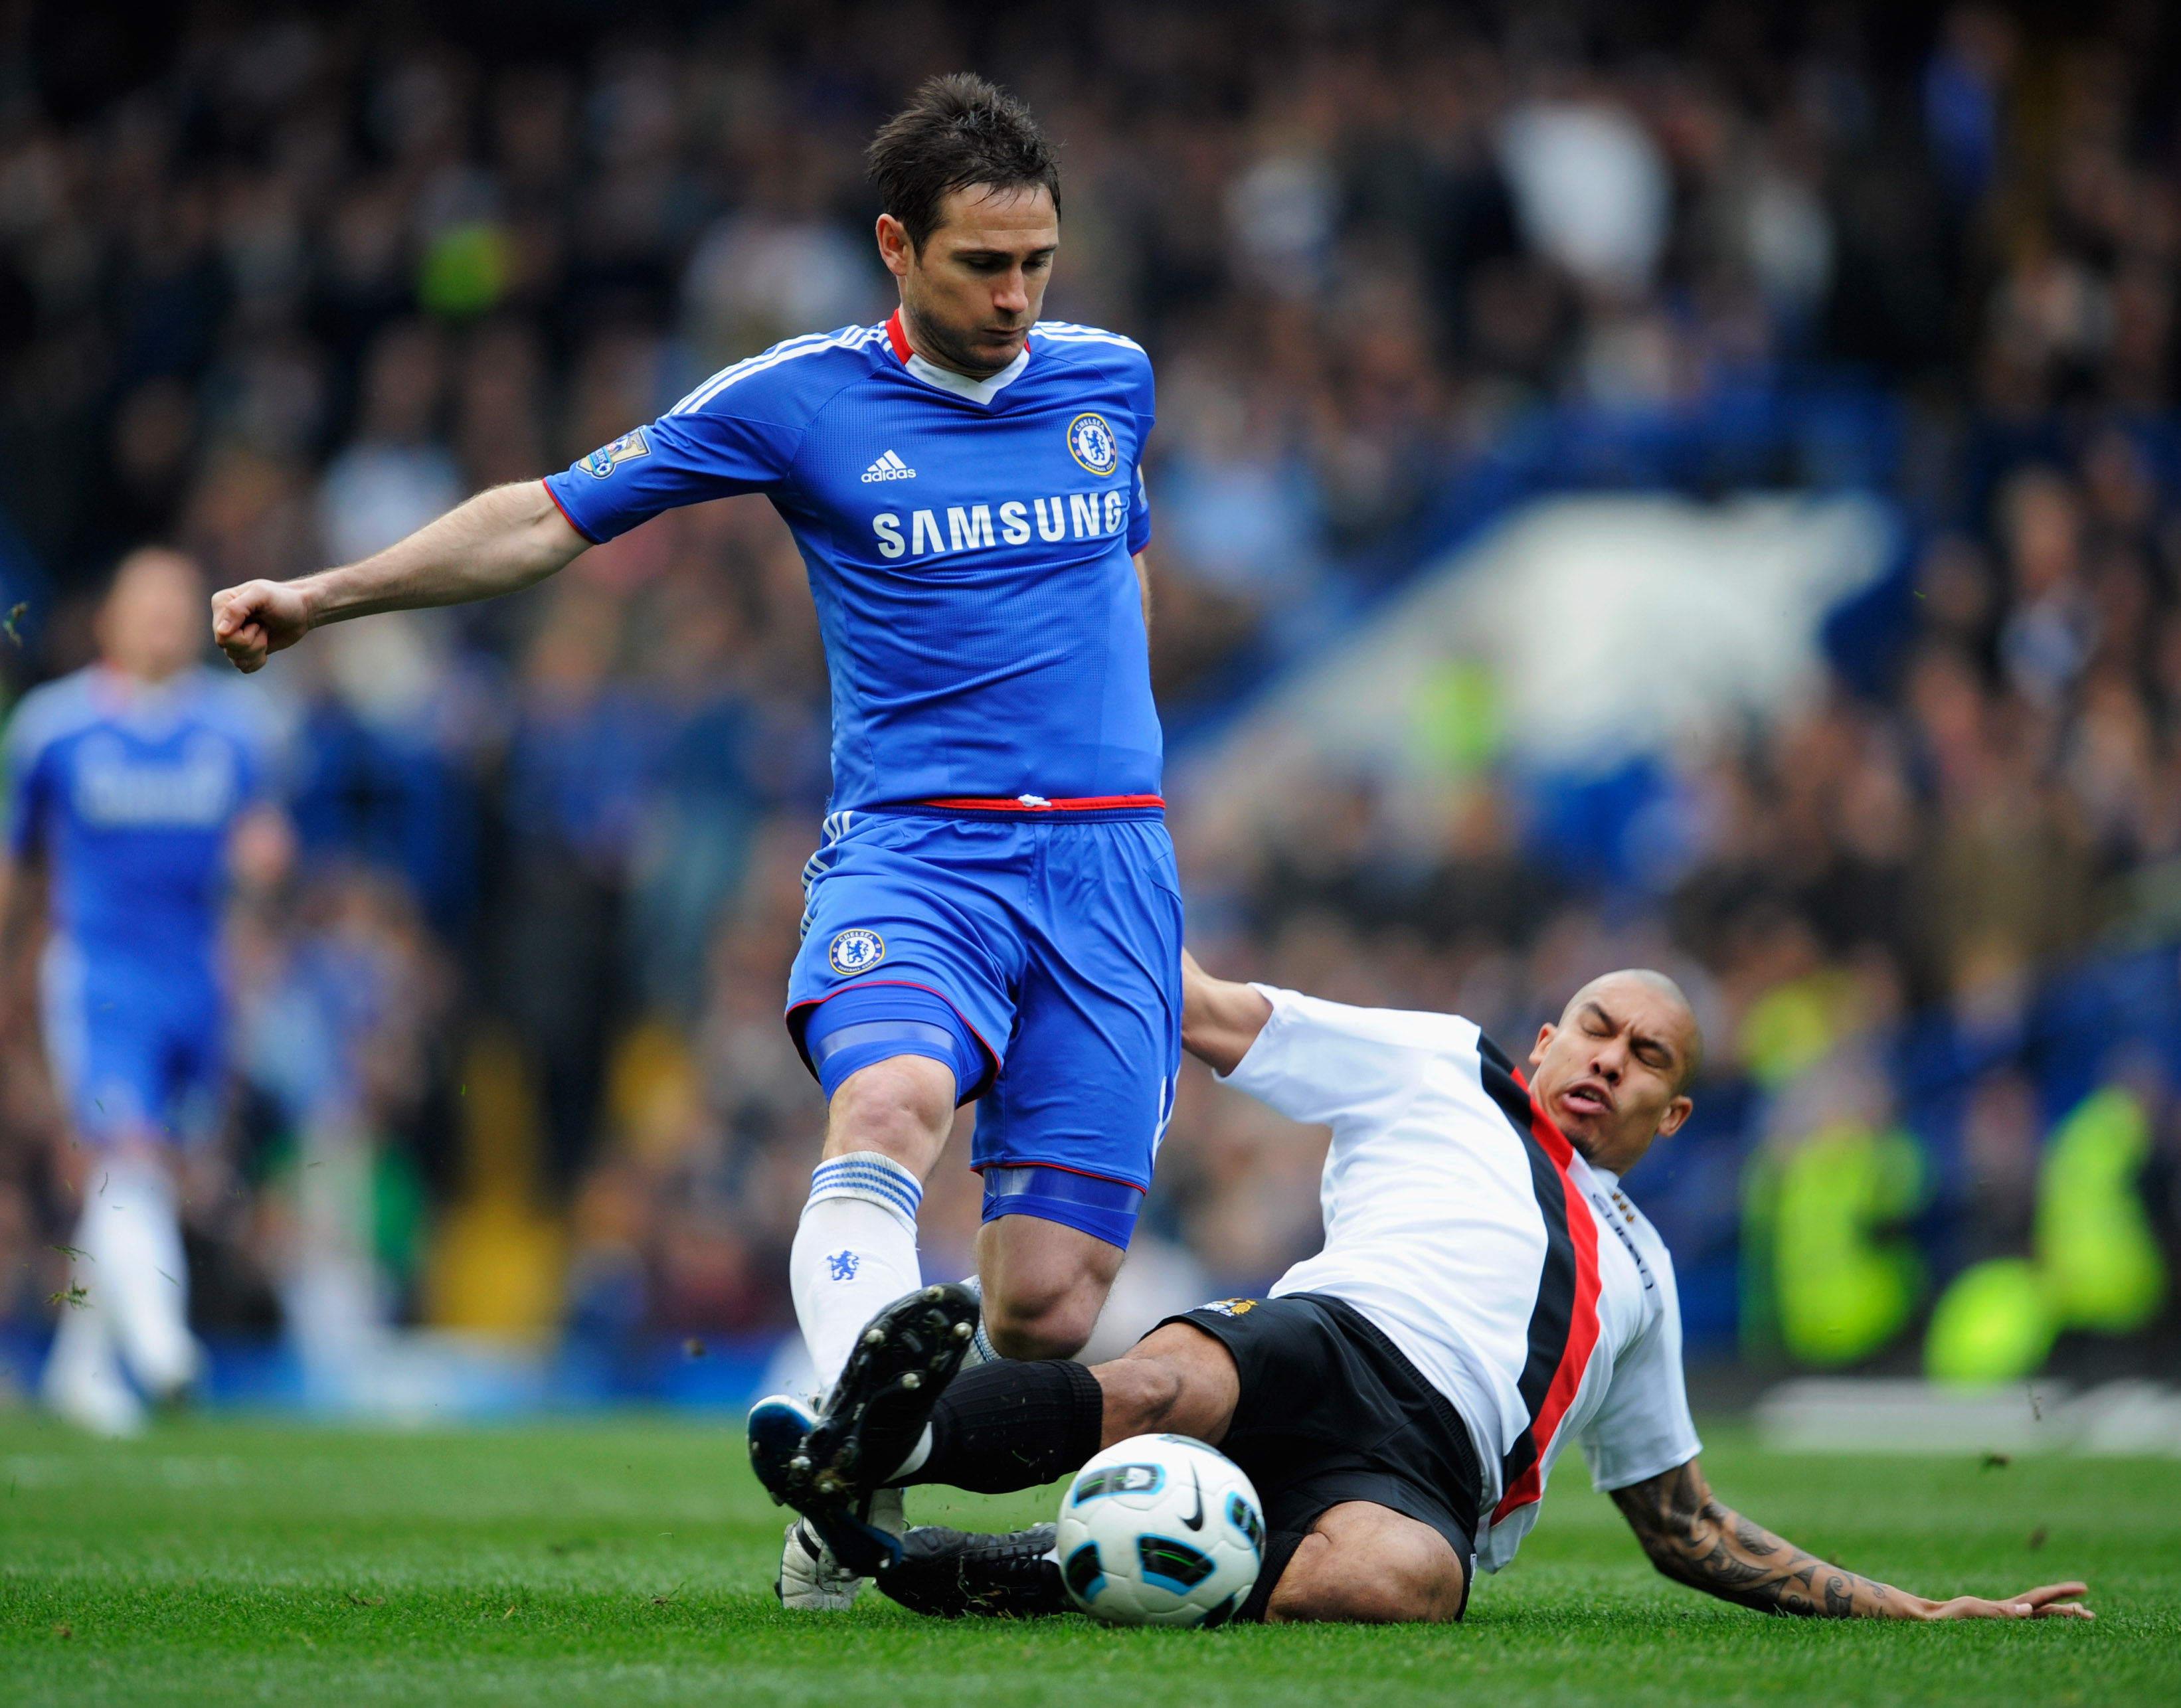 LONDON, ENGLAND - MARCH 20:  Frank Lampard of Chelsea is tackled by Nigel de Jong of Manchester City during the Barclays Premier League match between Chelsea and Manchester City at Stamford Bridge on March 20, 2011 in London, England.  (Photo by Michael R